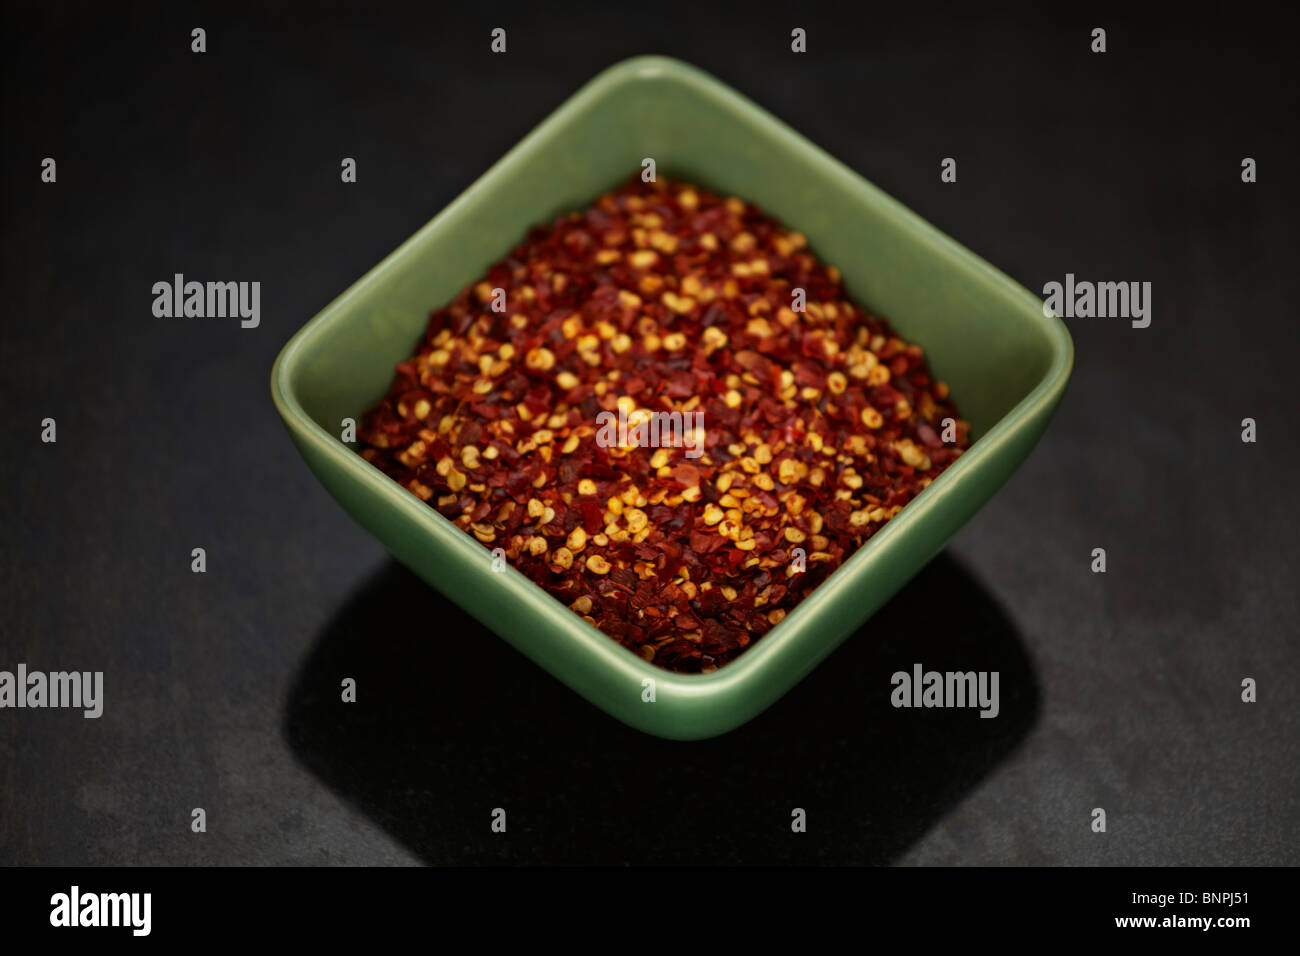 Dried chilli flakes and seeds in a green bowl on a black marble surface Stock Photo